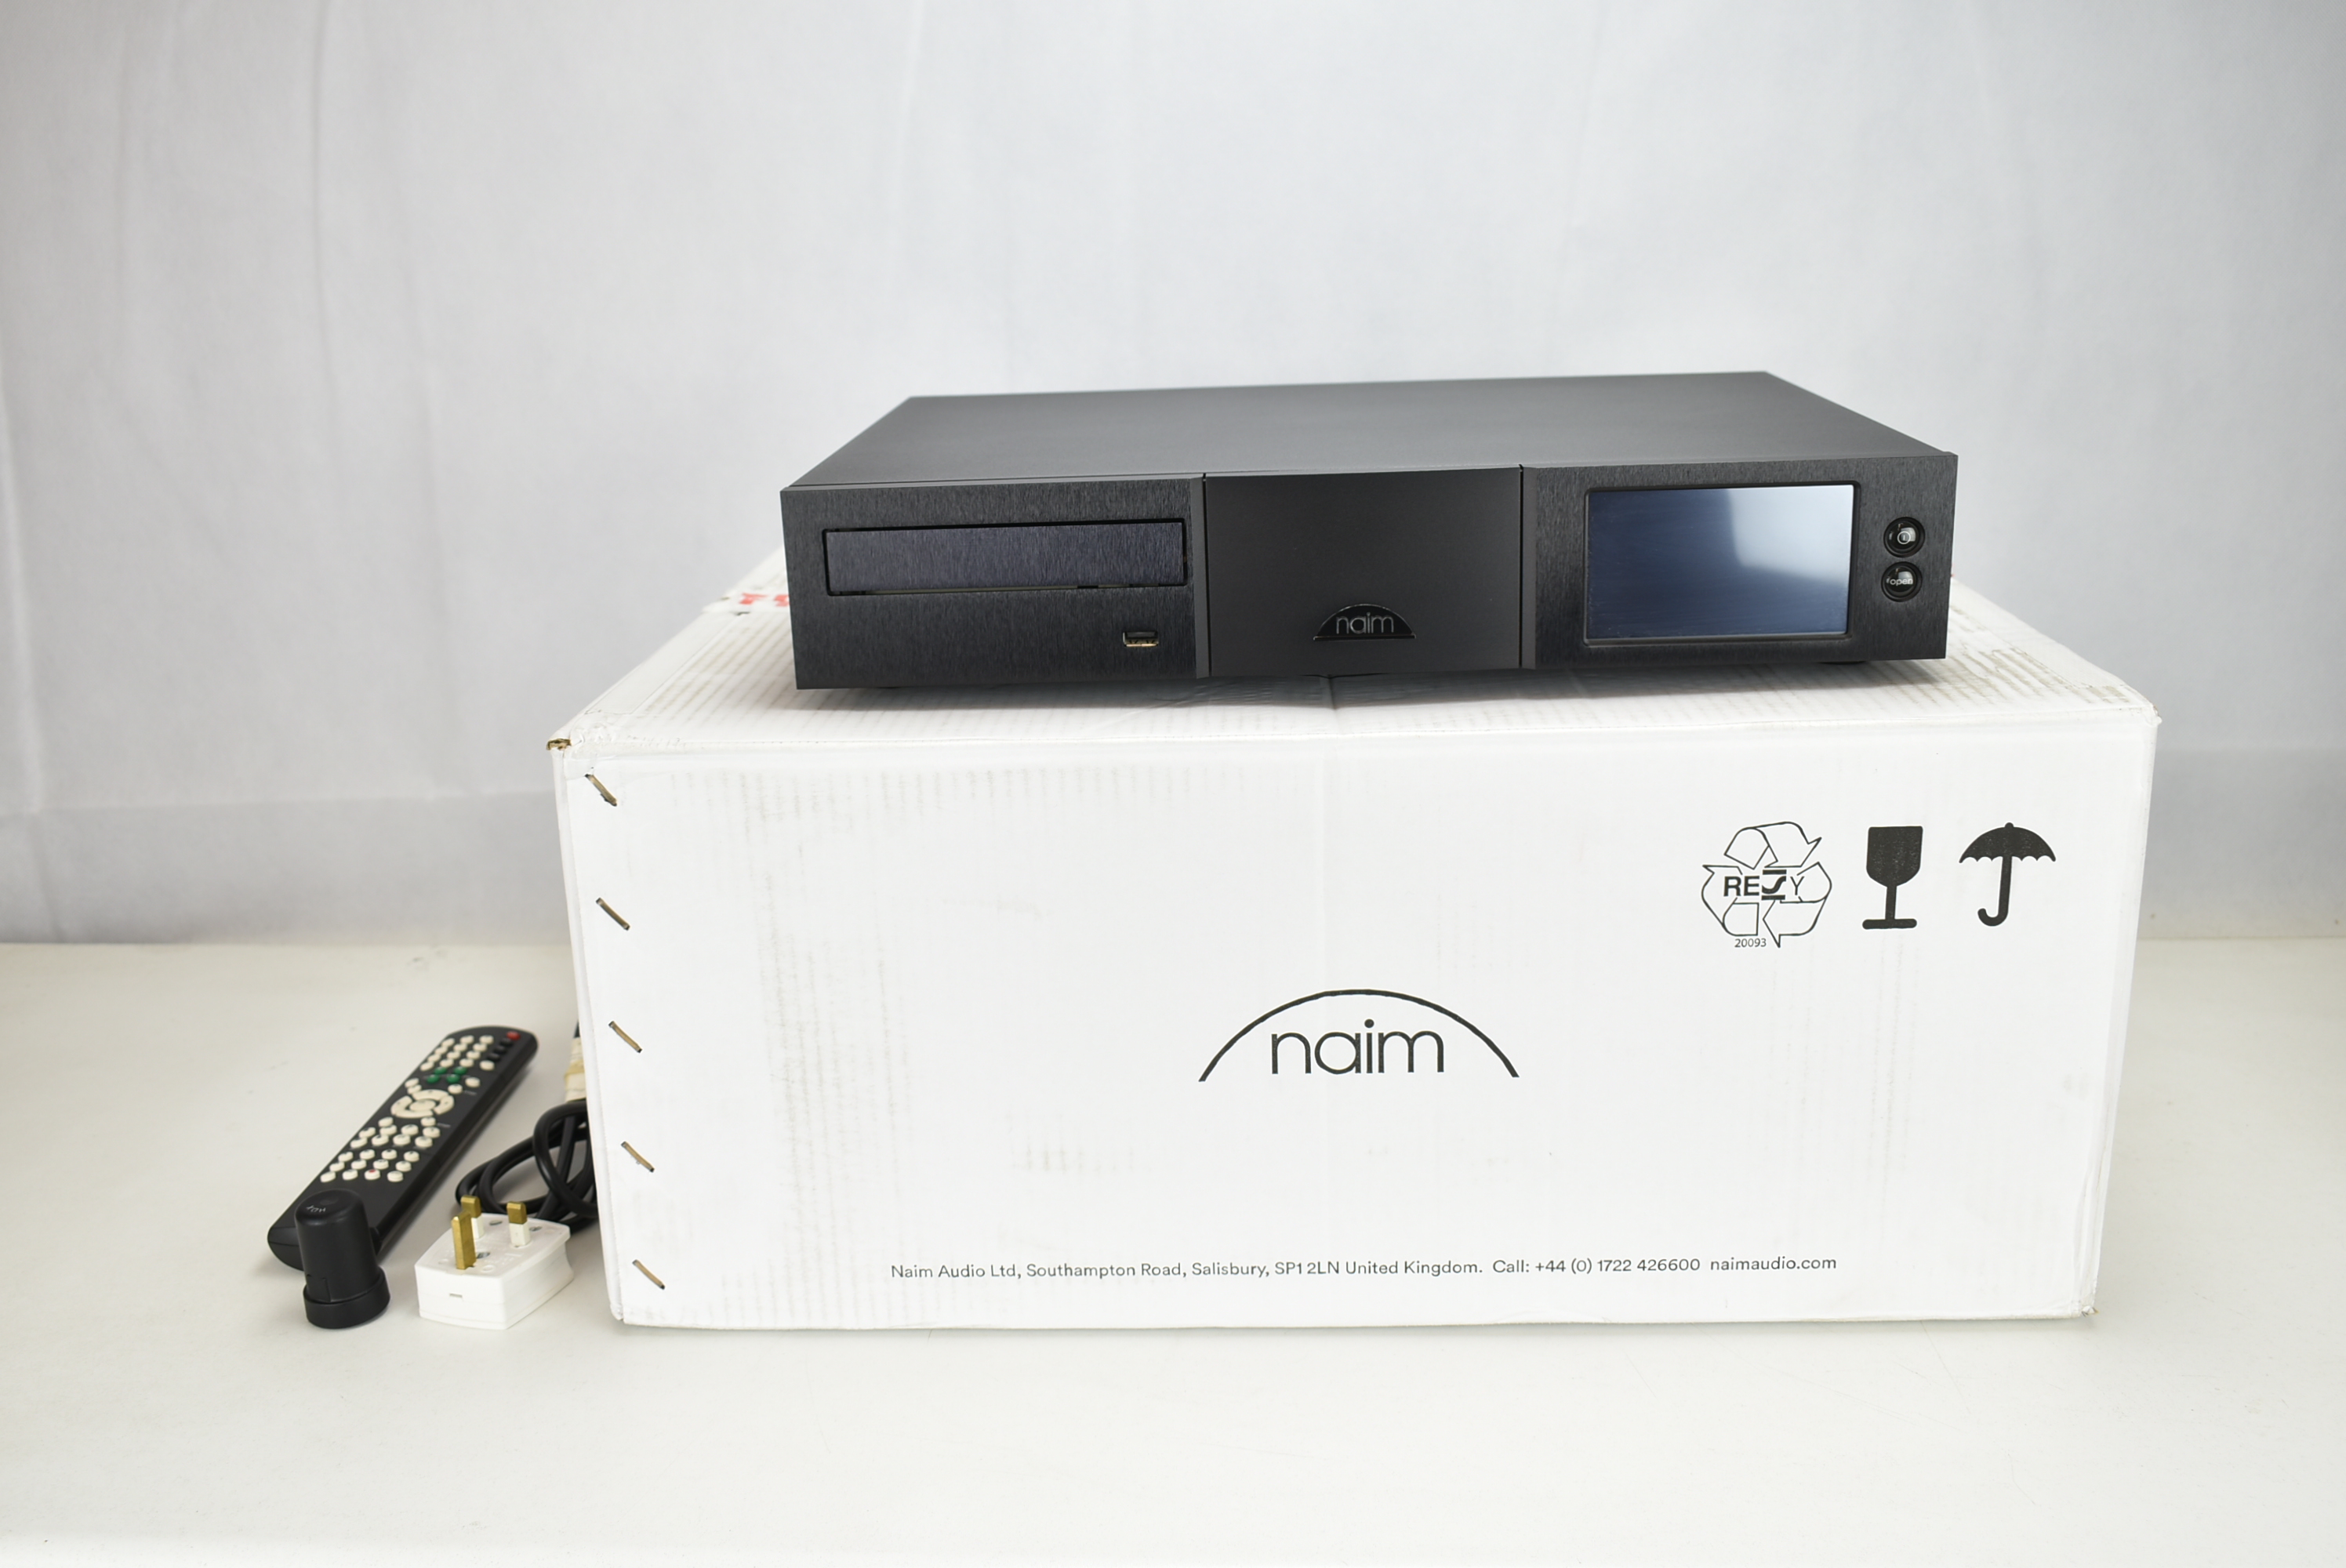 Picture of Naim HDX, Digital music player, Used VGC, Dealer